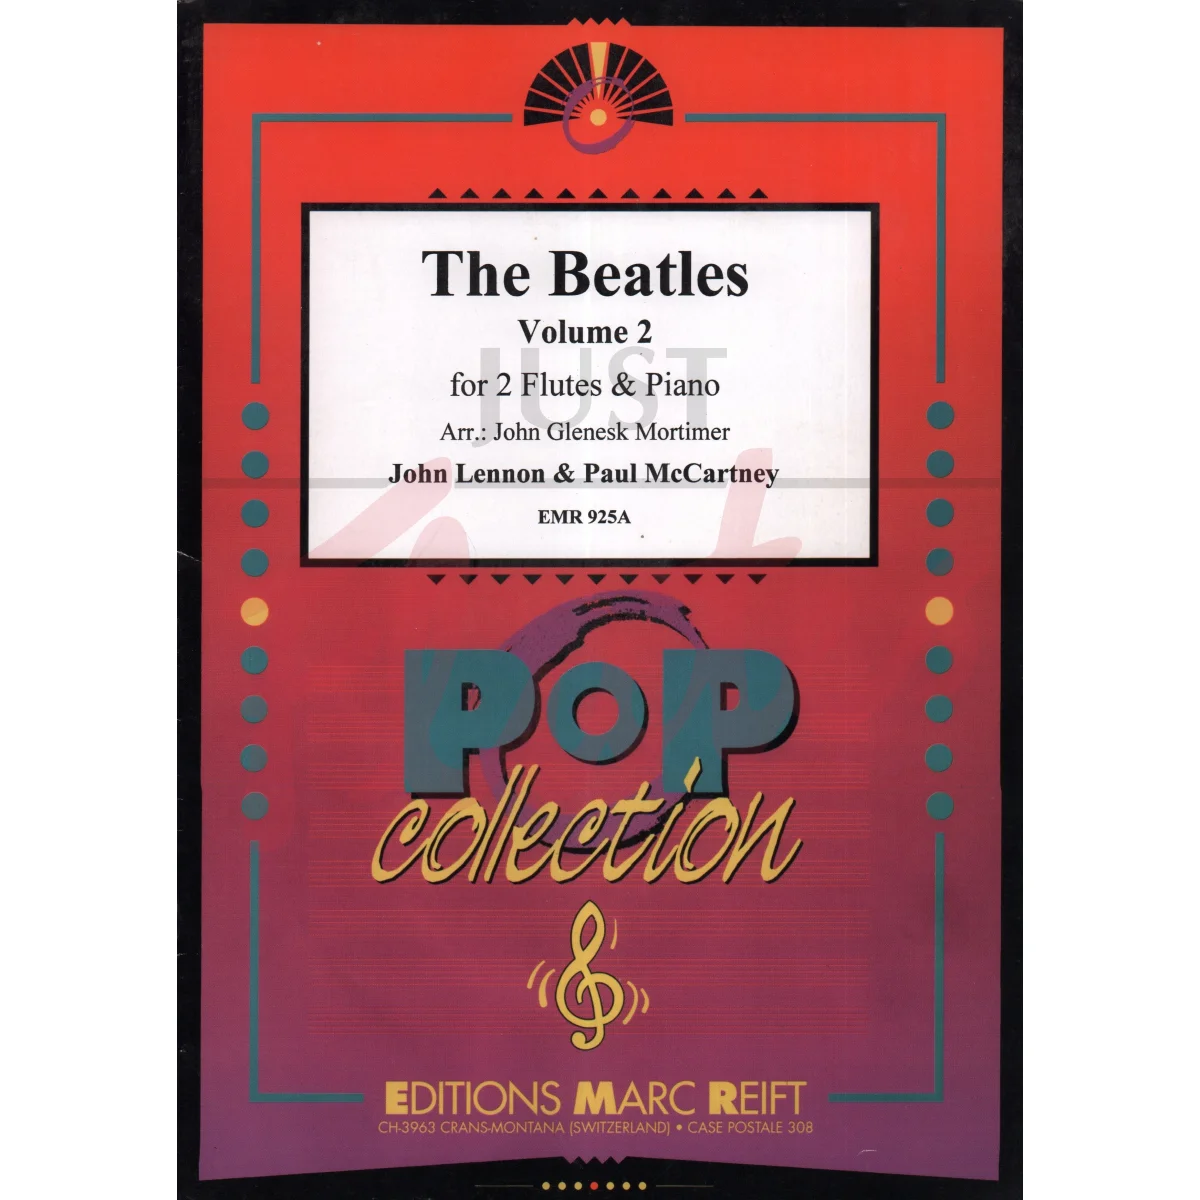 The Beatles for Two Flutes and Piano